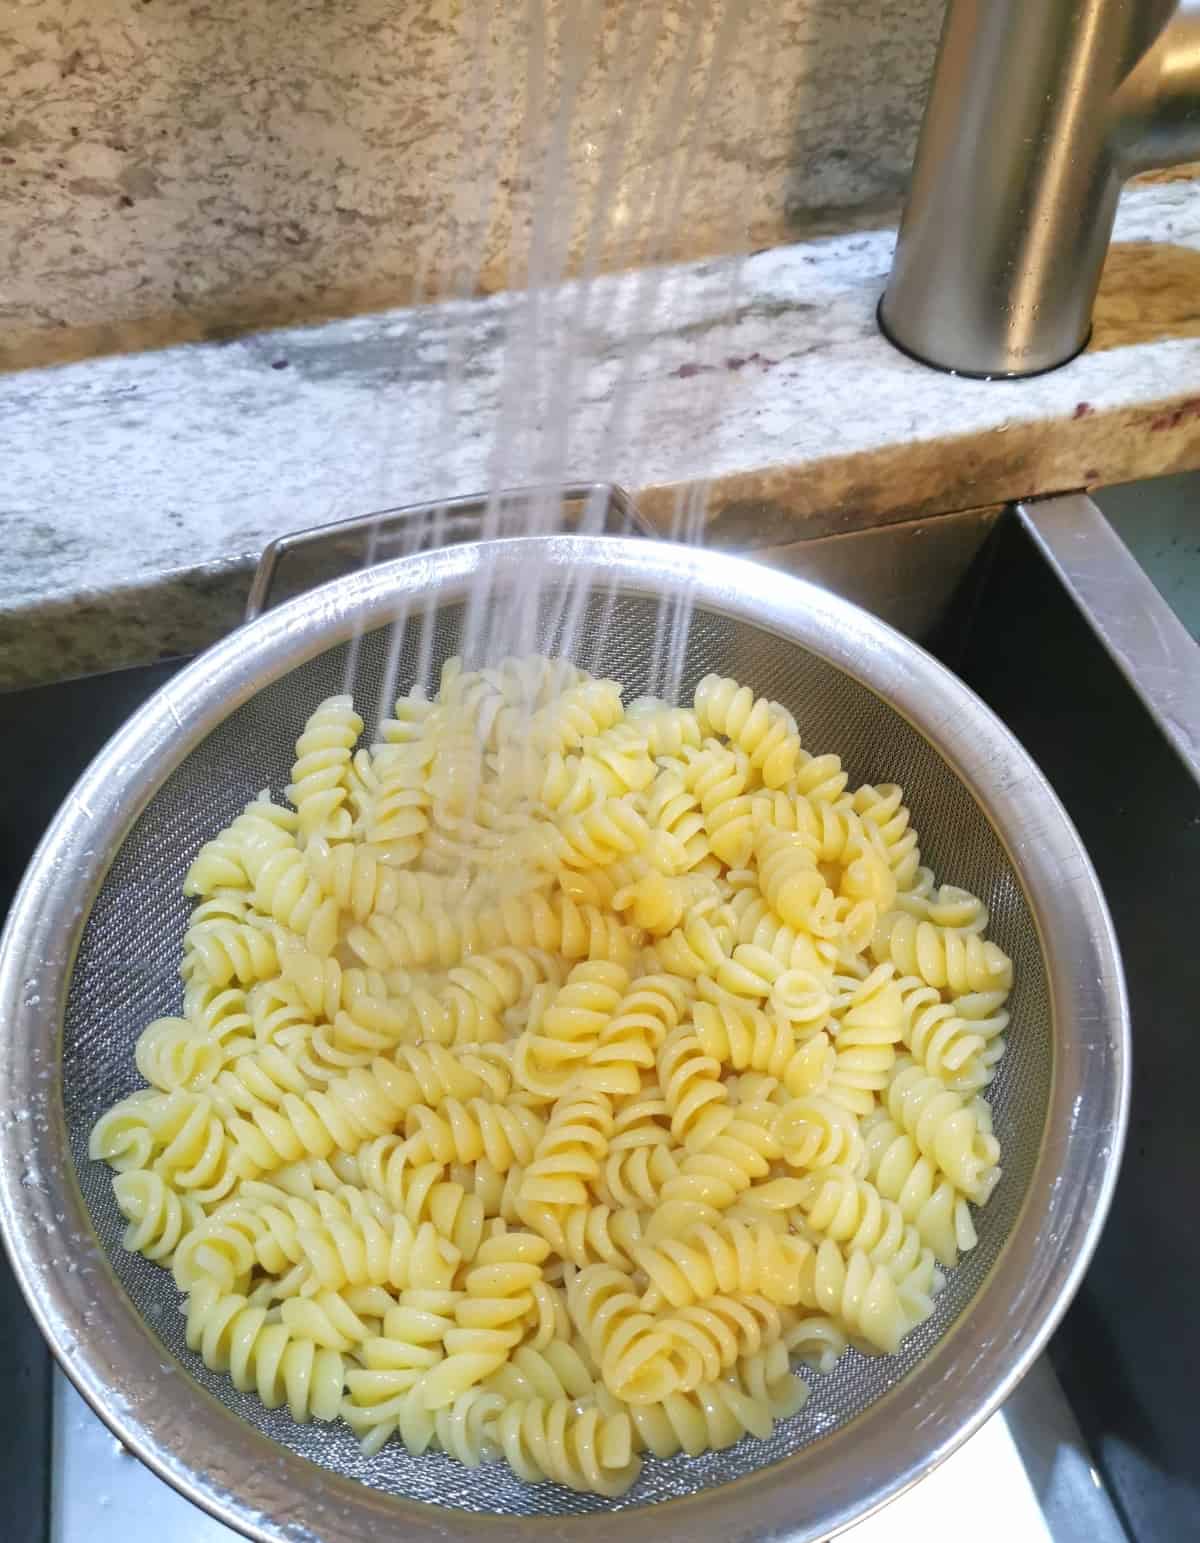 cooked pasta rinsing in a strainer in the sink under cool water.